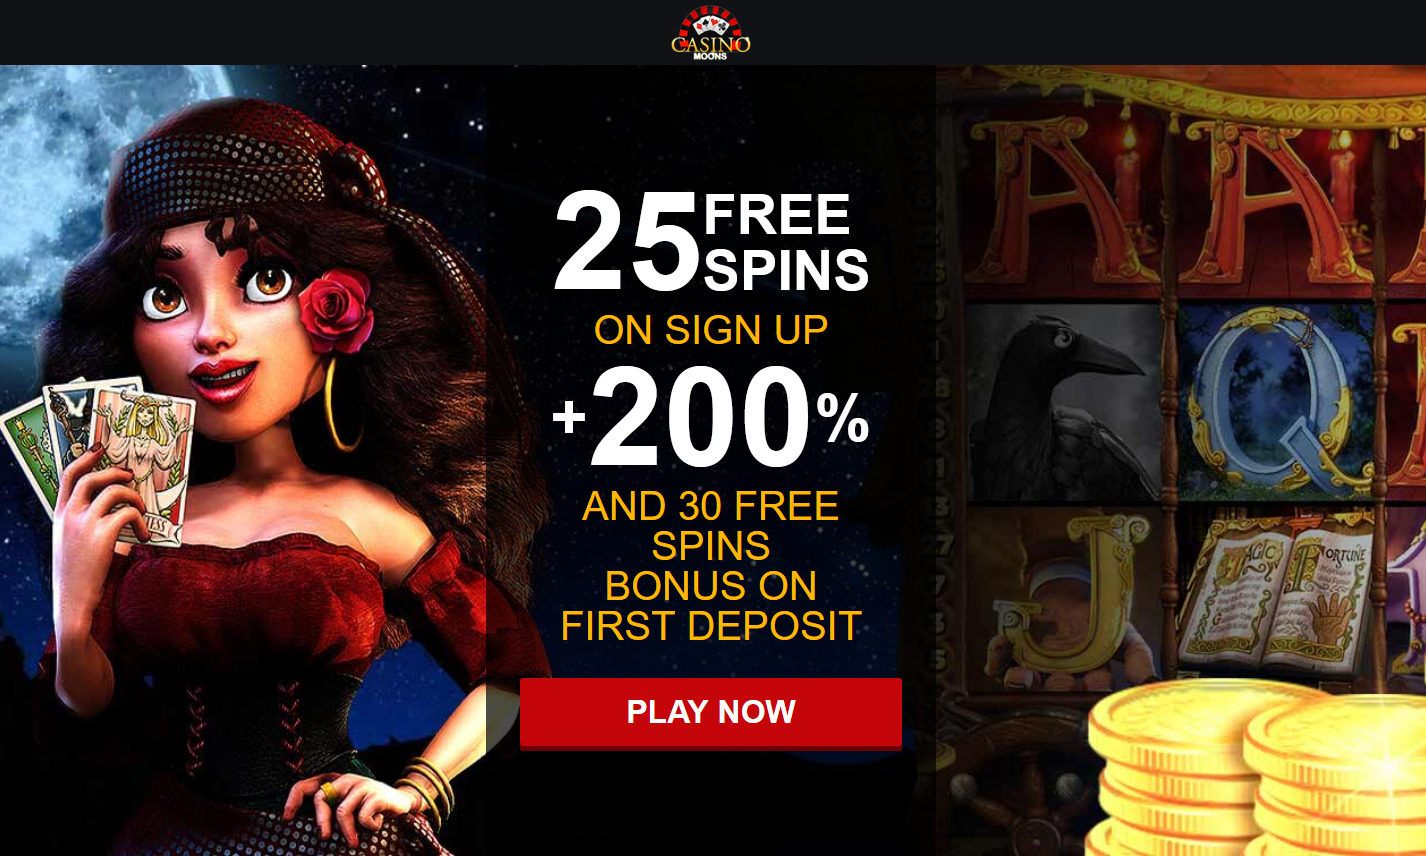 25
                                FREE SPINS ON SIGN UP + 200 % AND 30
                                FREE SPINS BONUS ON FIRST DEPOSIT